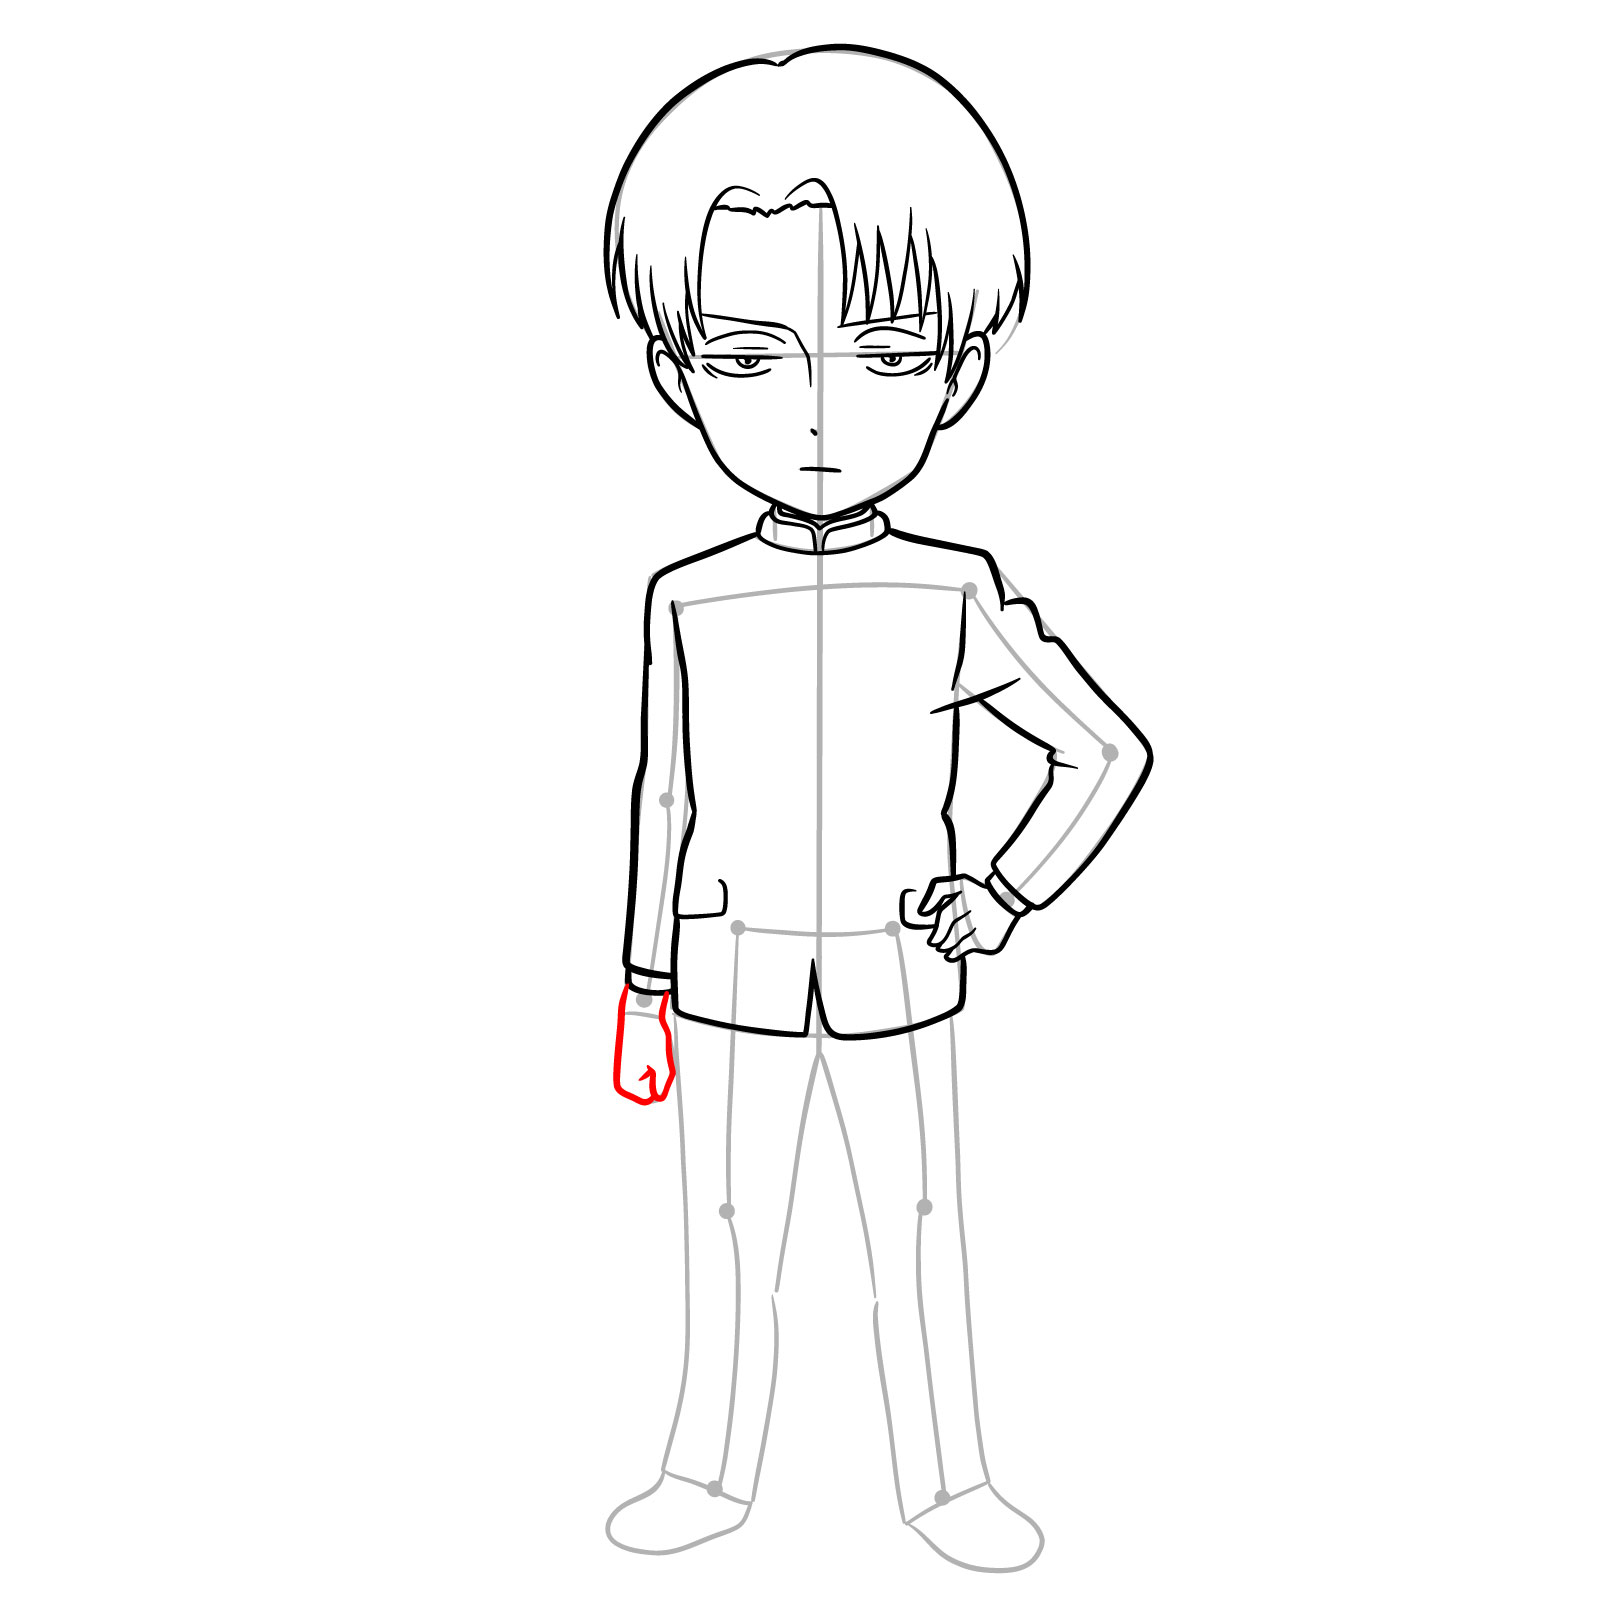 How to draw Chibi Levi - adding second hand clenched in a fist - step 15